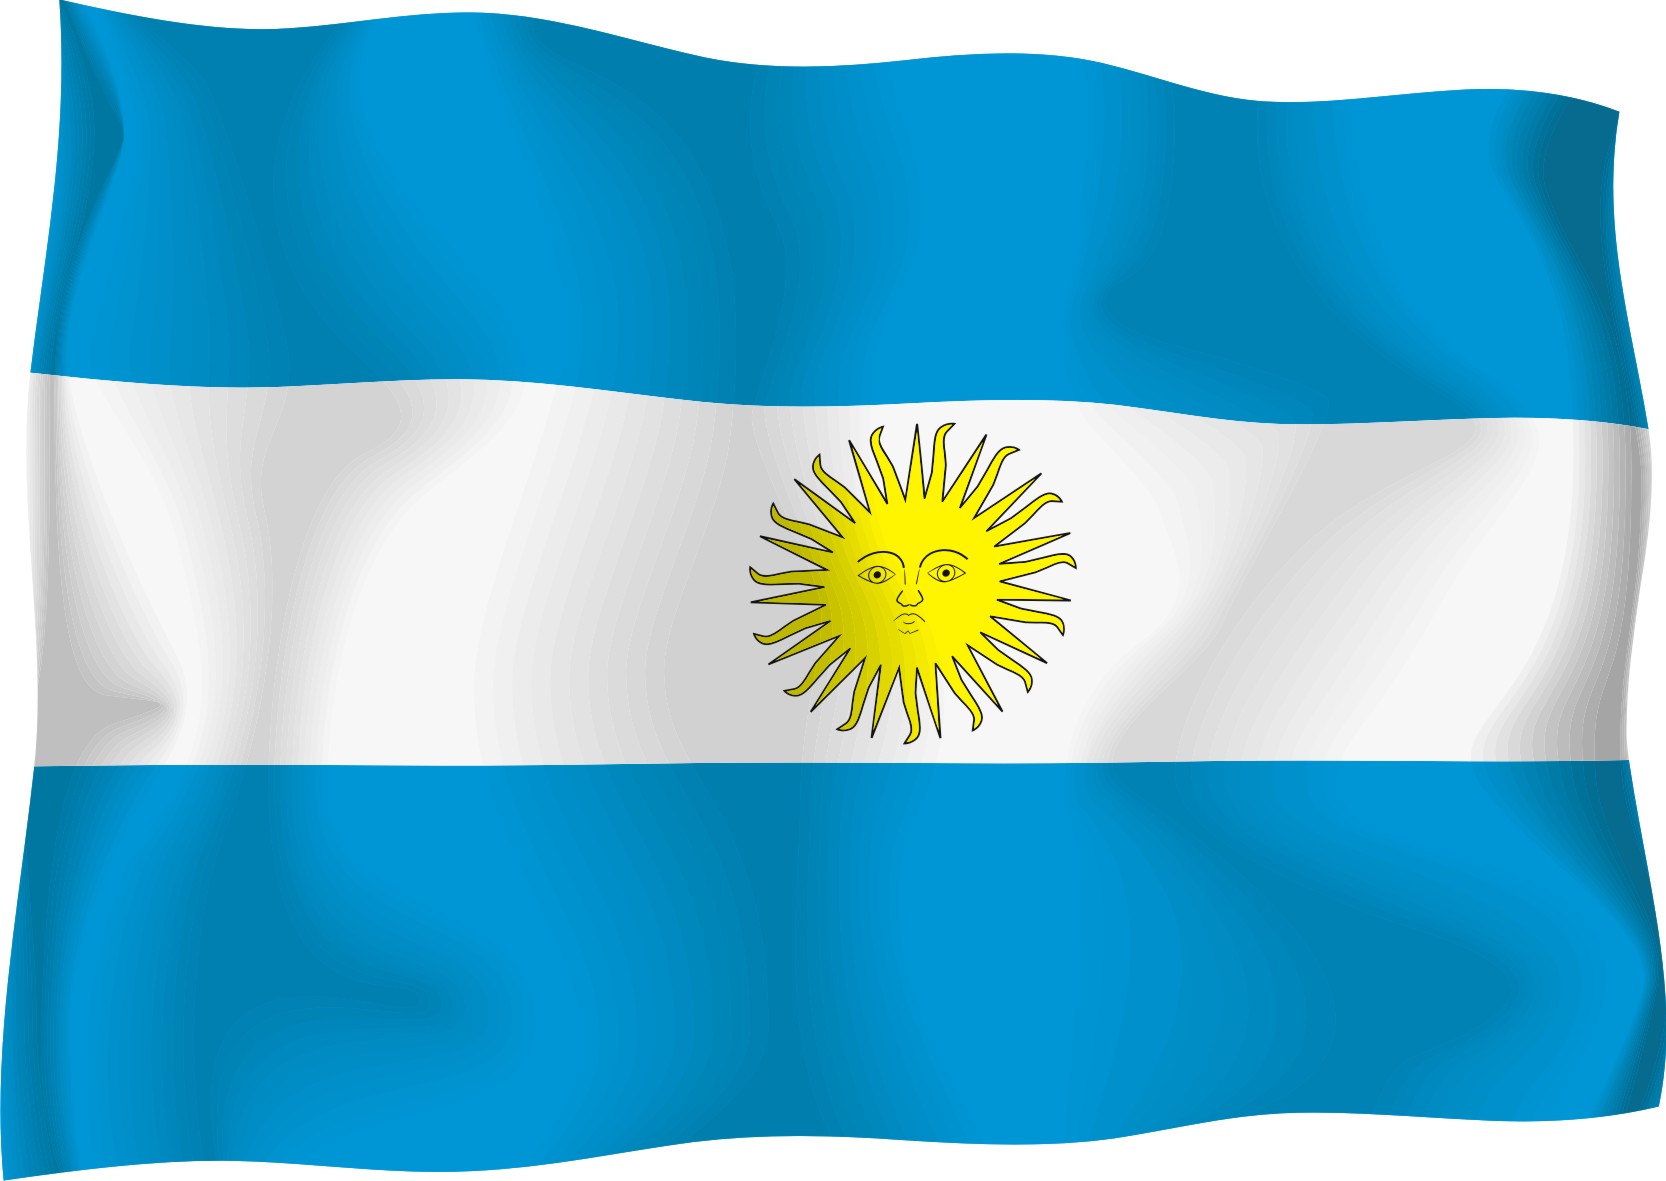 Argentina Flag wallpaper by RyanMerchant  Download on ZEDGE  1a69